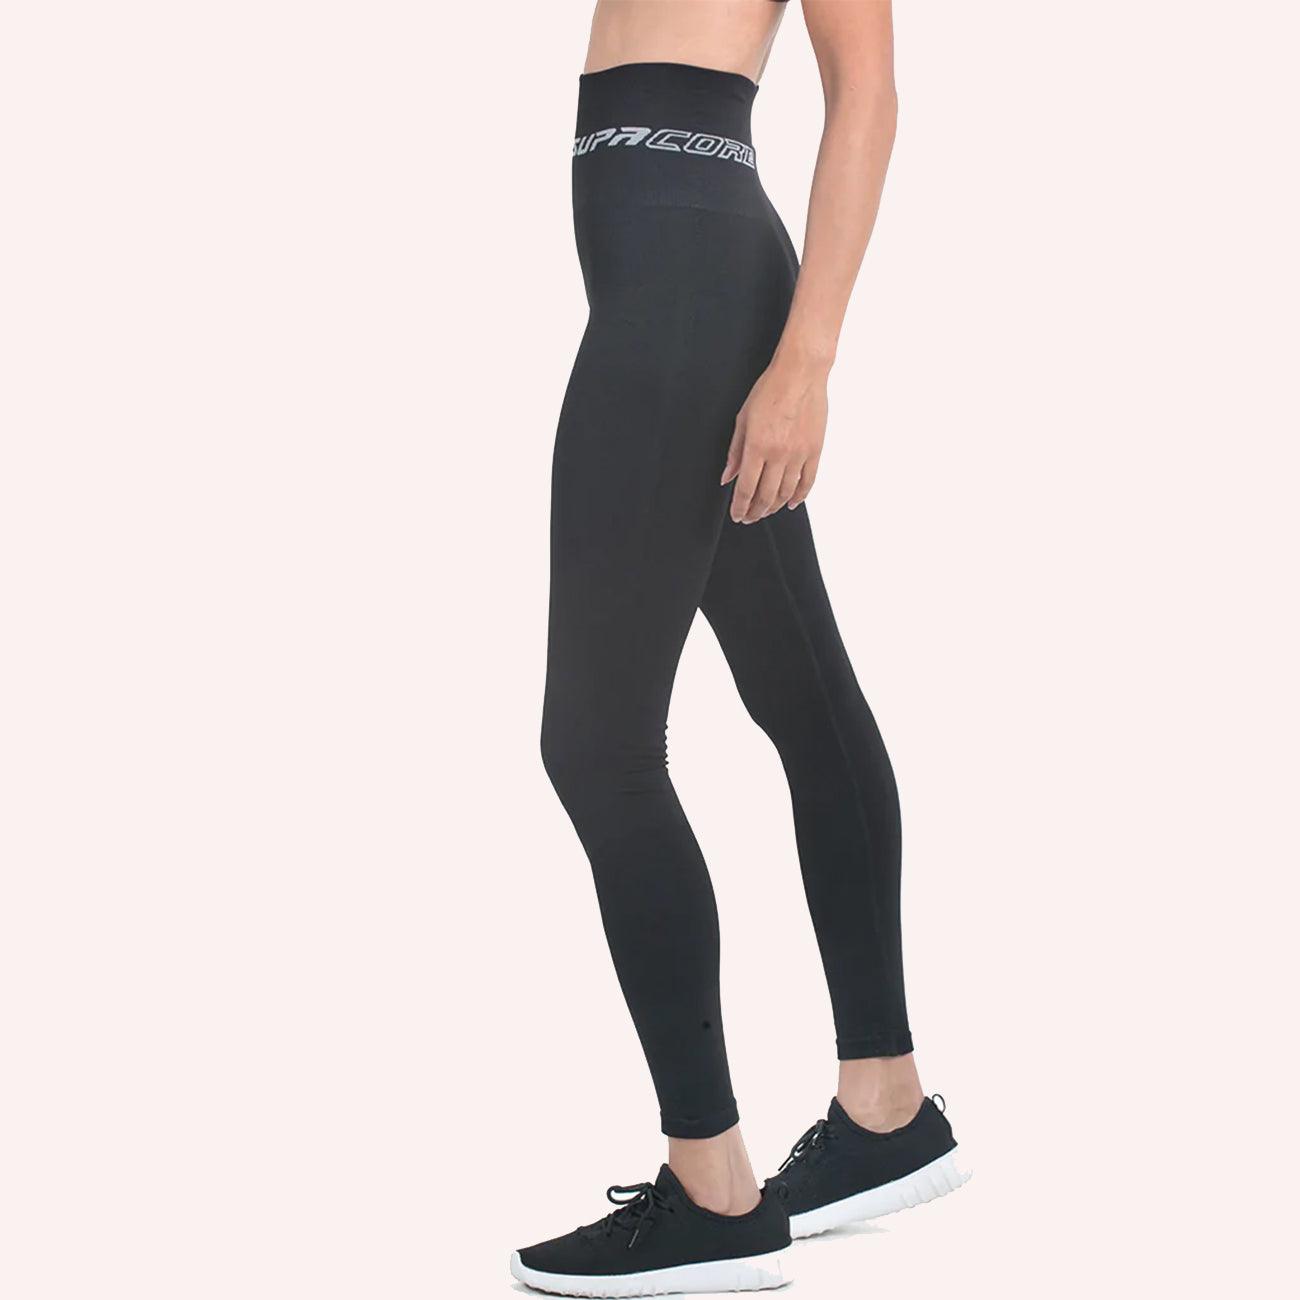 Patented Olivia Coretech Injury Recovery and Postpartum Compression Leggings - Black